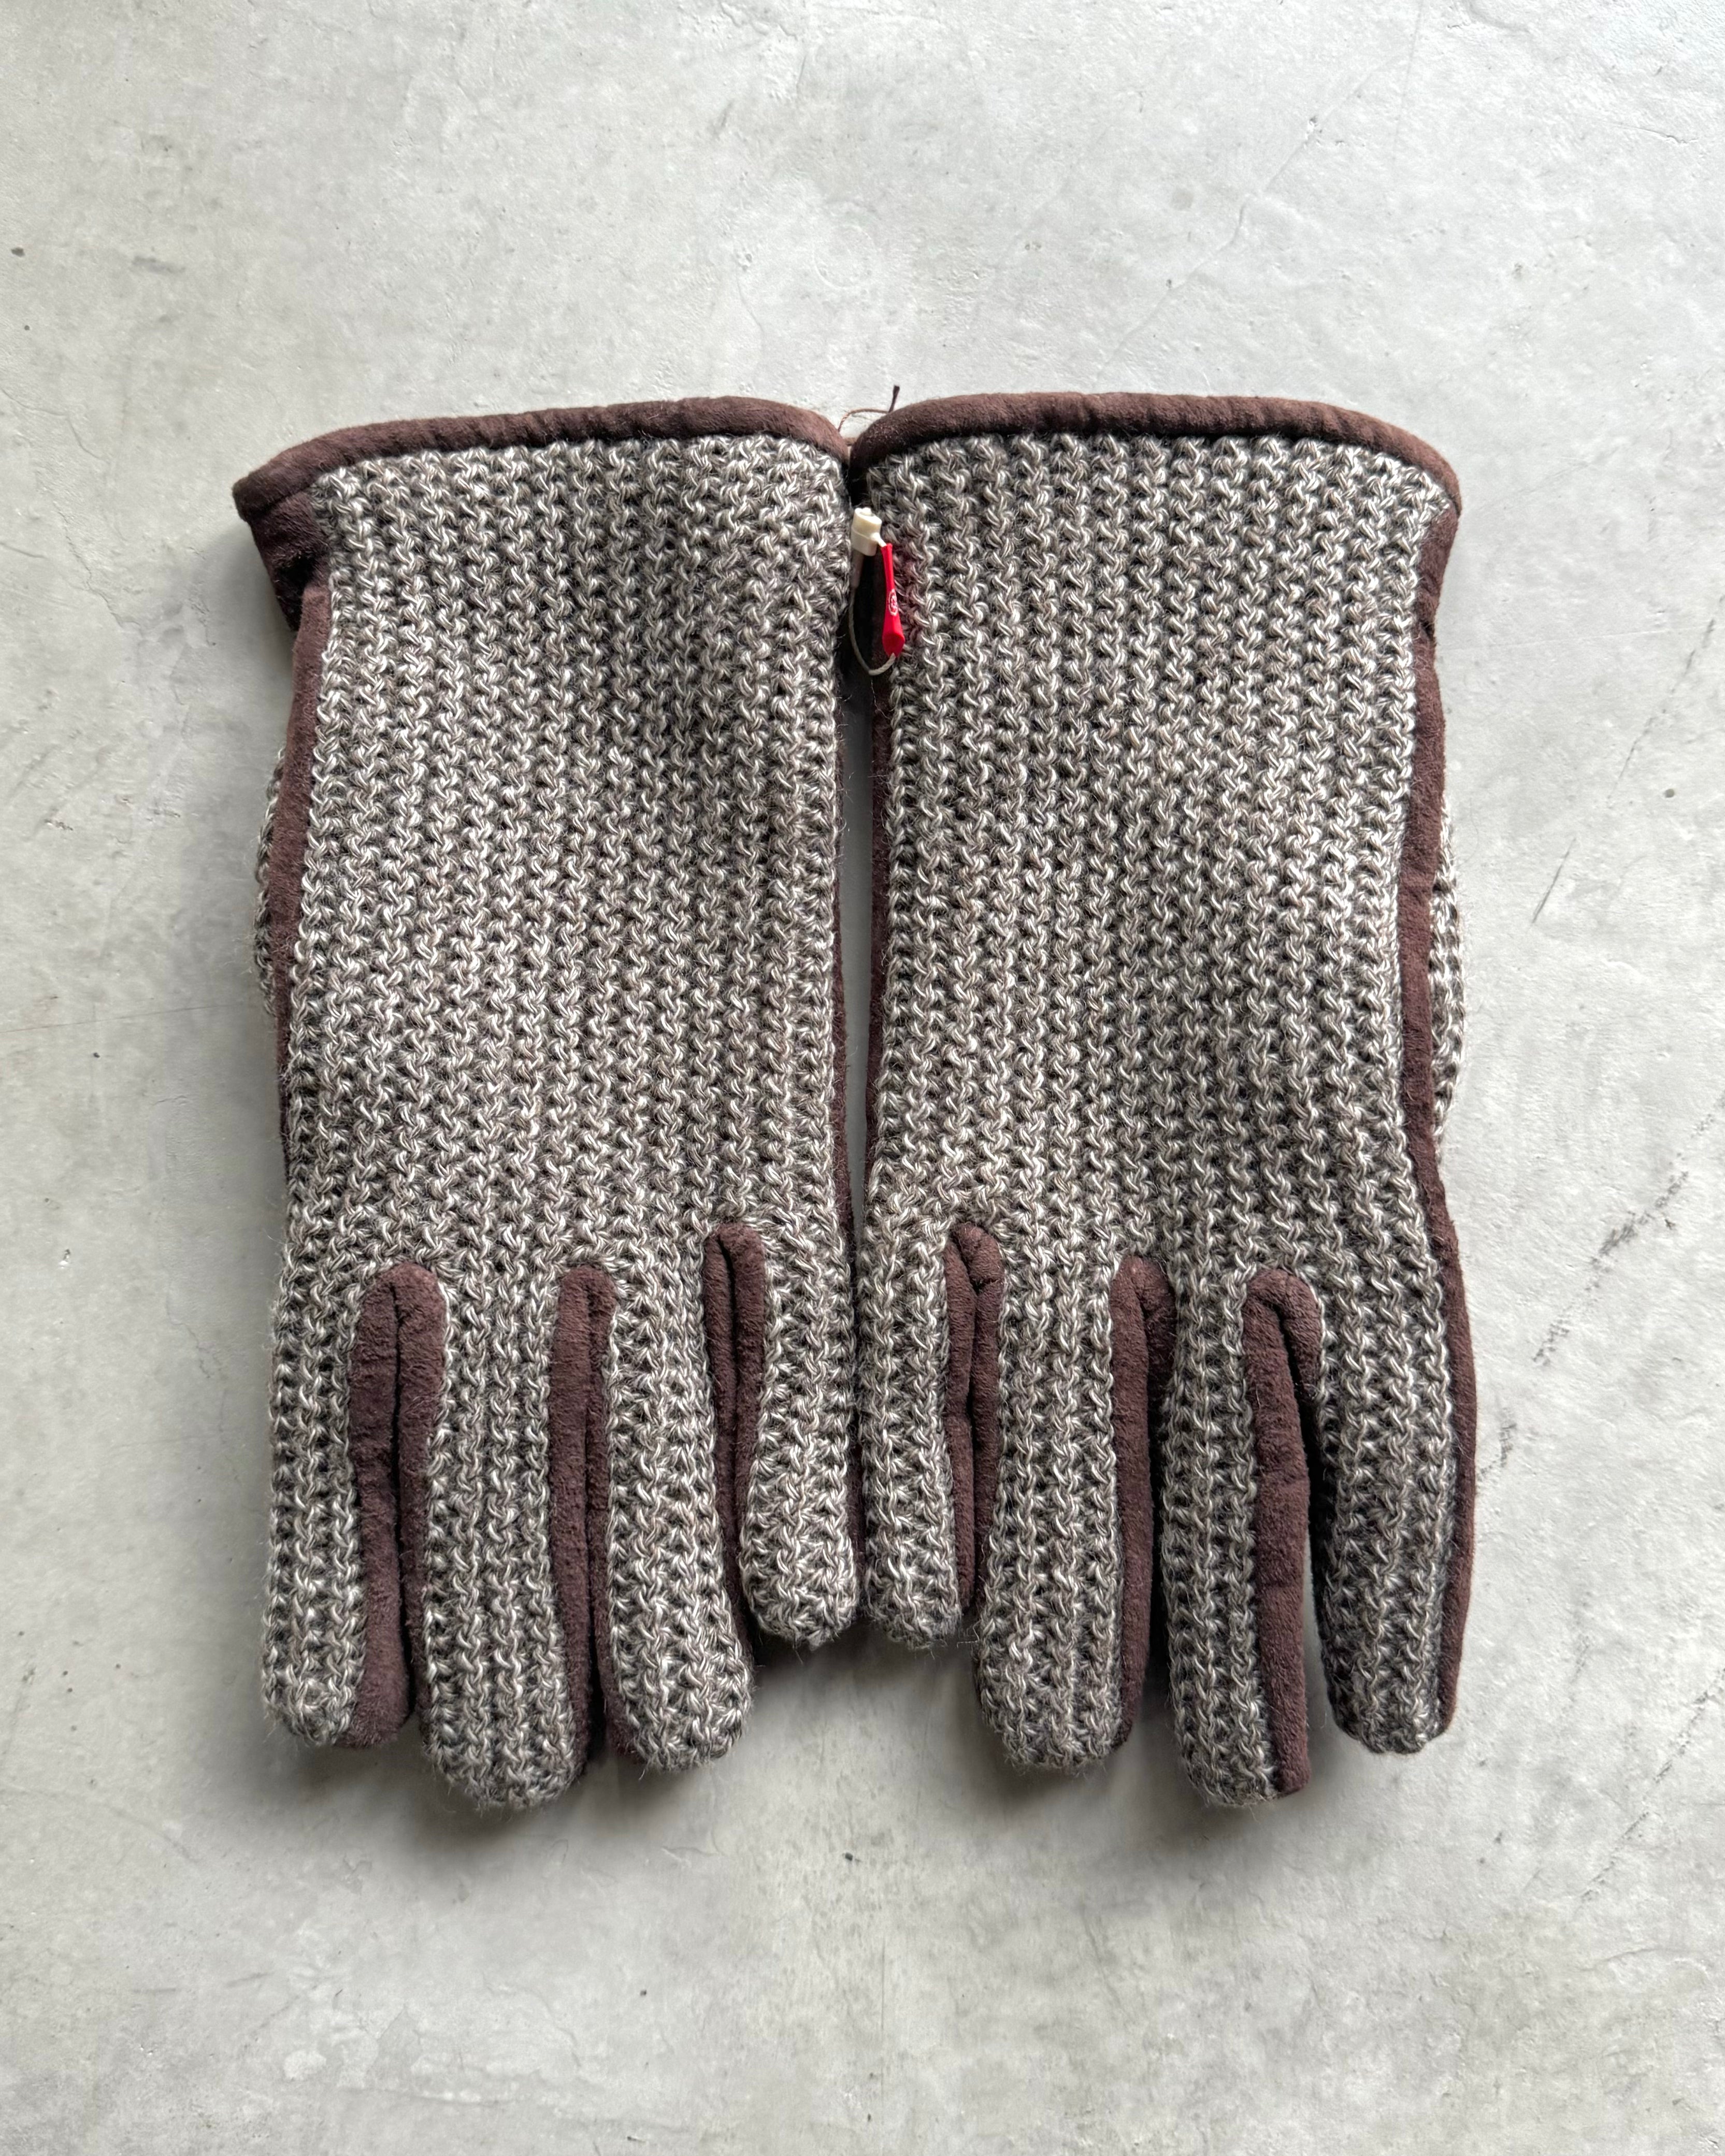 ANACHRONORM / Suede Knit Mix Glove by ISLAND KNIT WORKS - BROWN